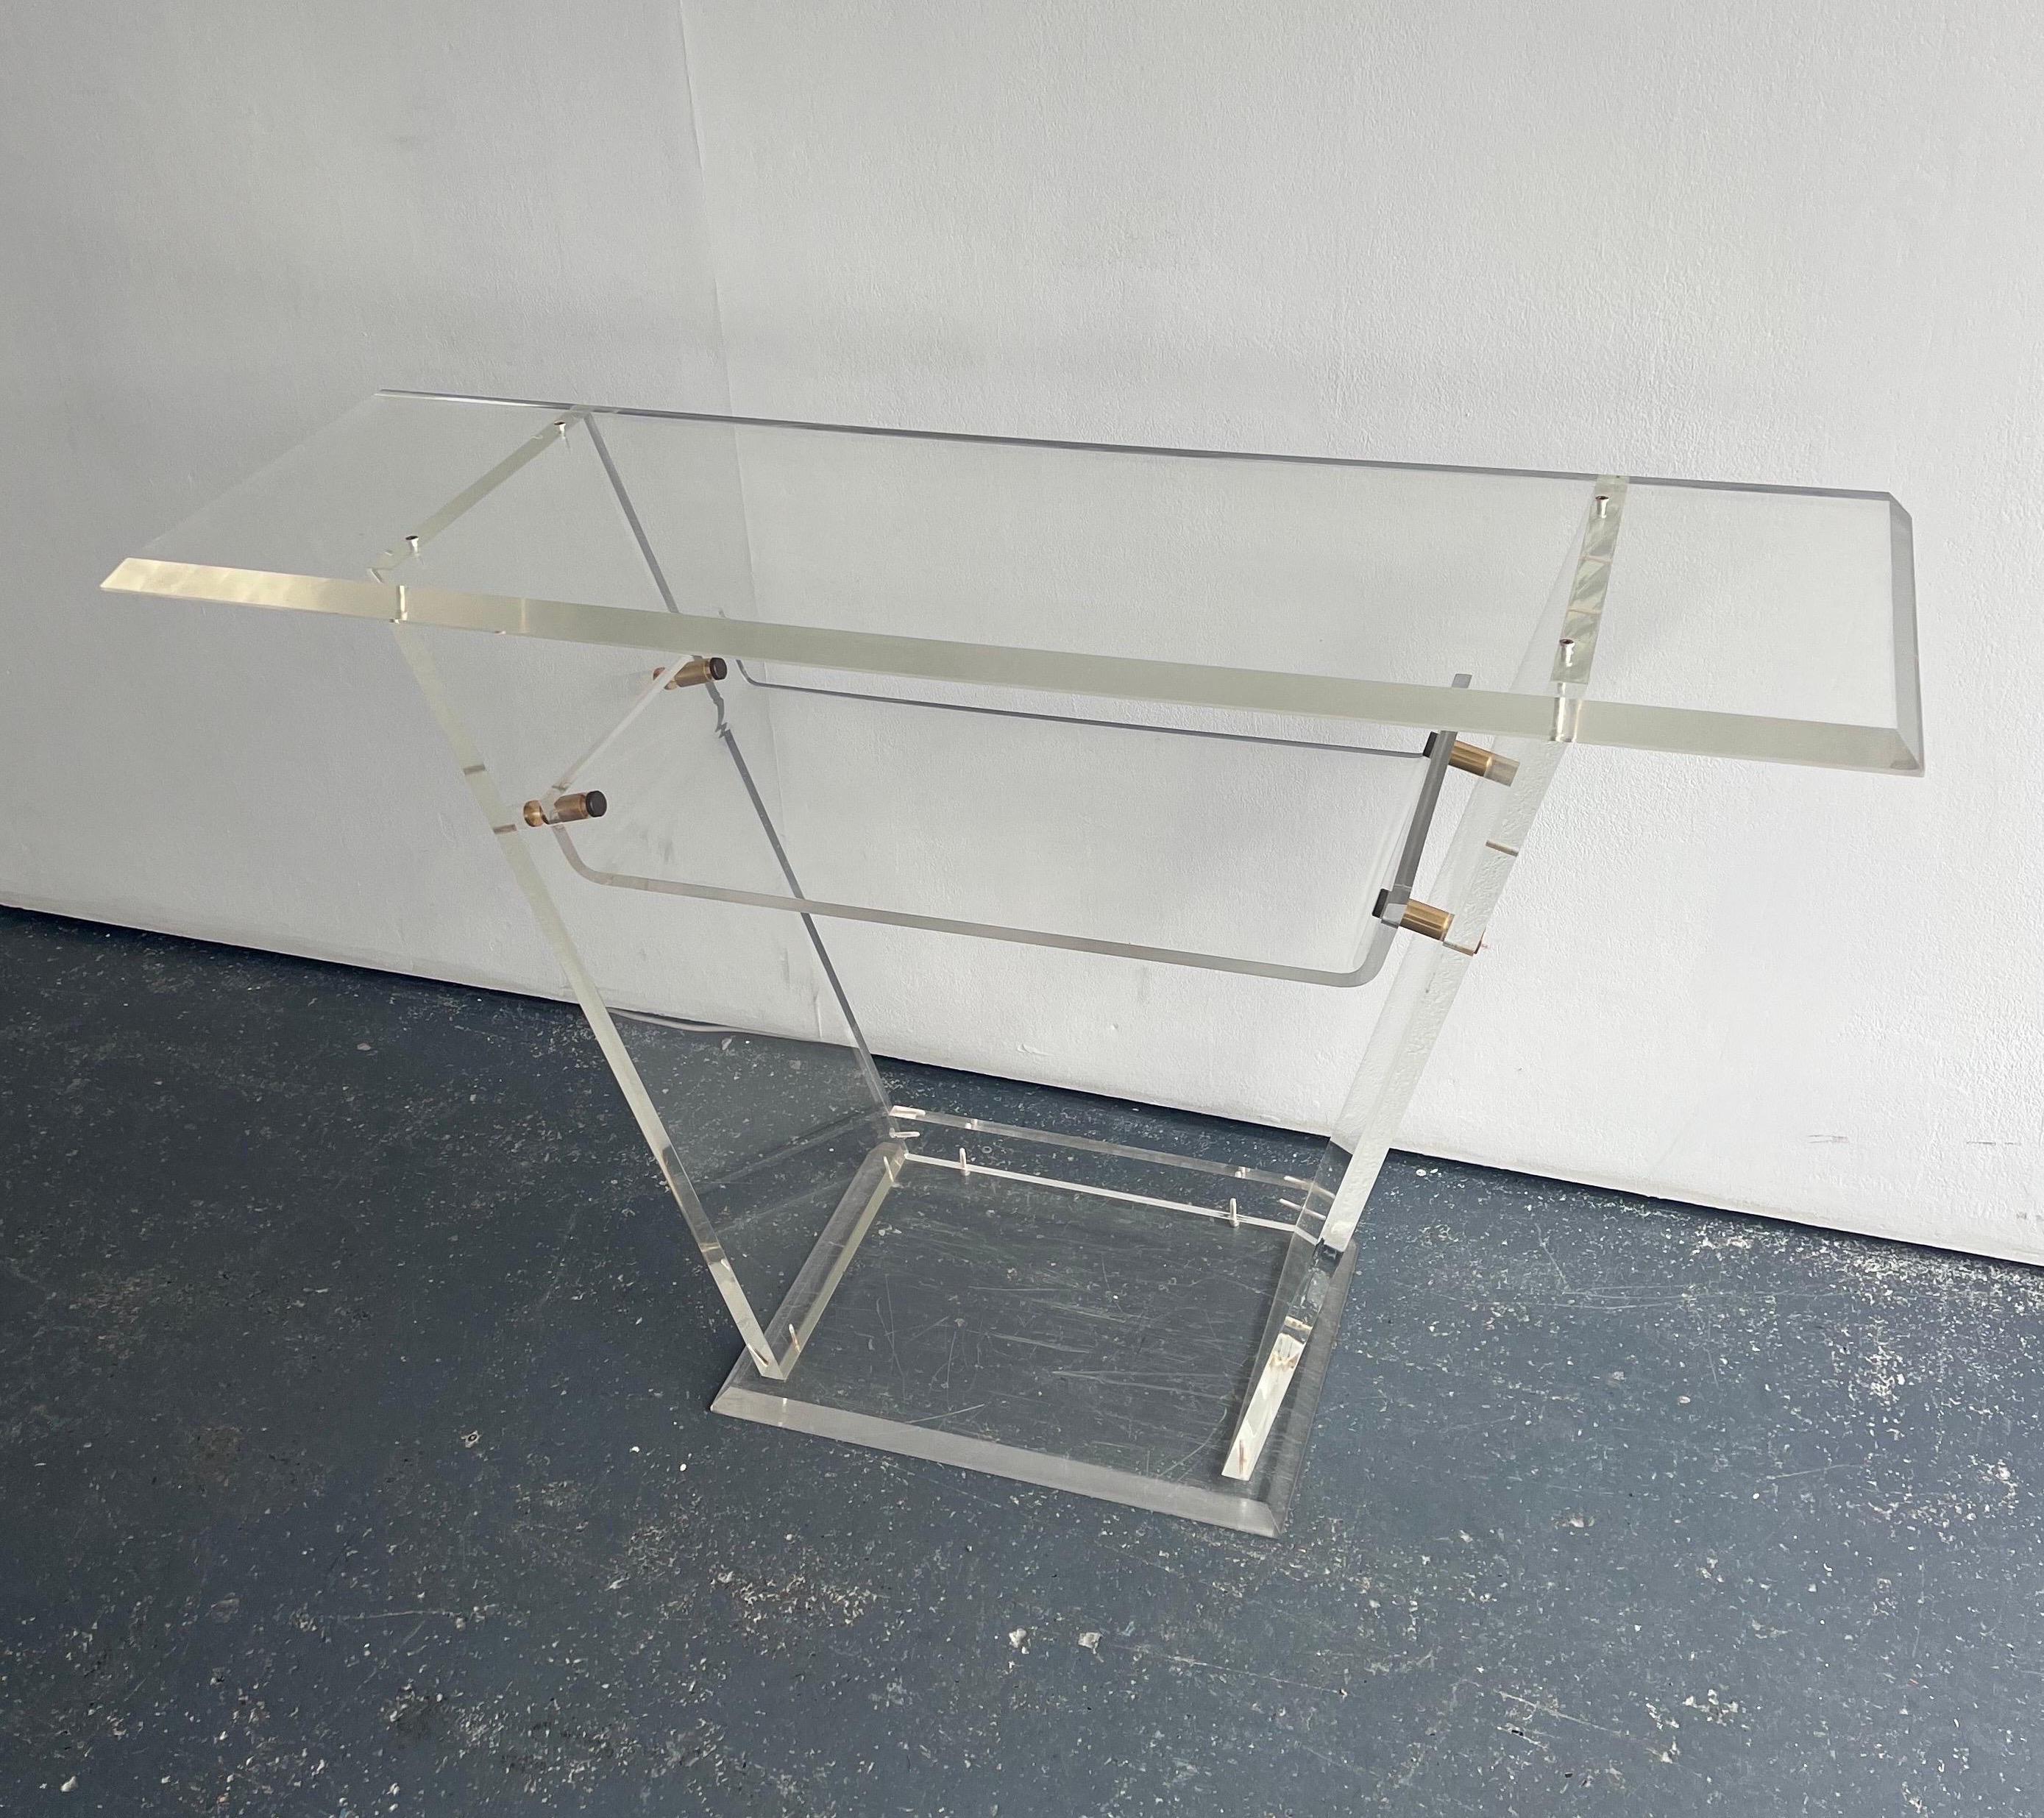 1970s Lucite and Brass Console Table with Shelf

A fabulous design that would look great in a hallway or living space. A very sleek lucite structure with elegant brass fixtures. In good condition, there are some scratches that are common with